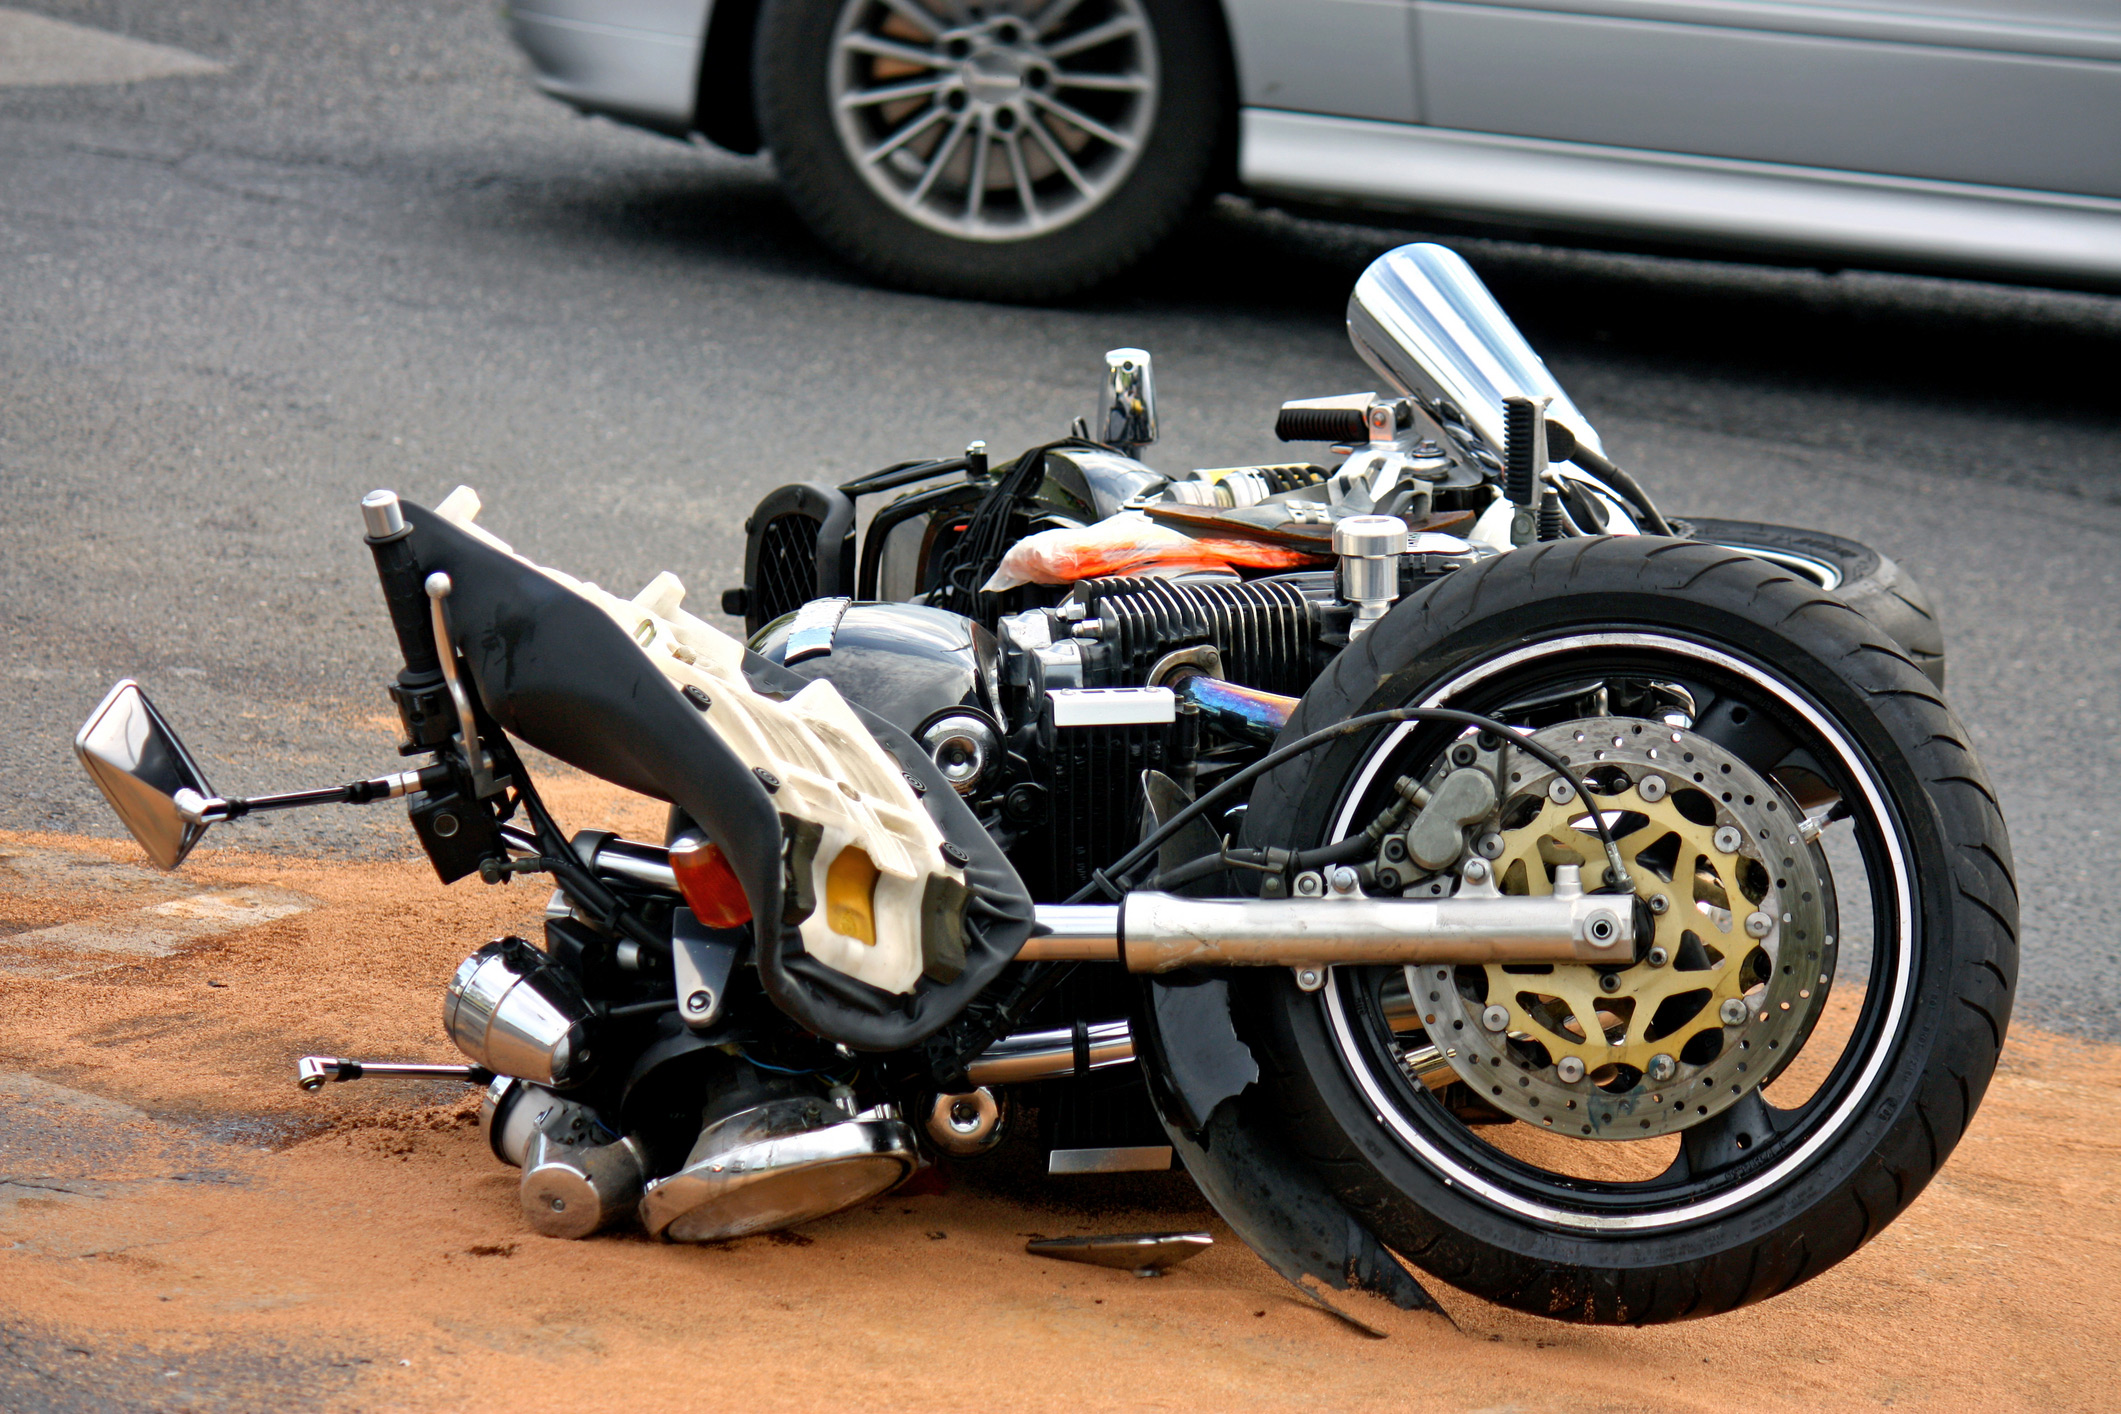 Motorcycle-accident-attorney-chicago